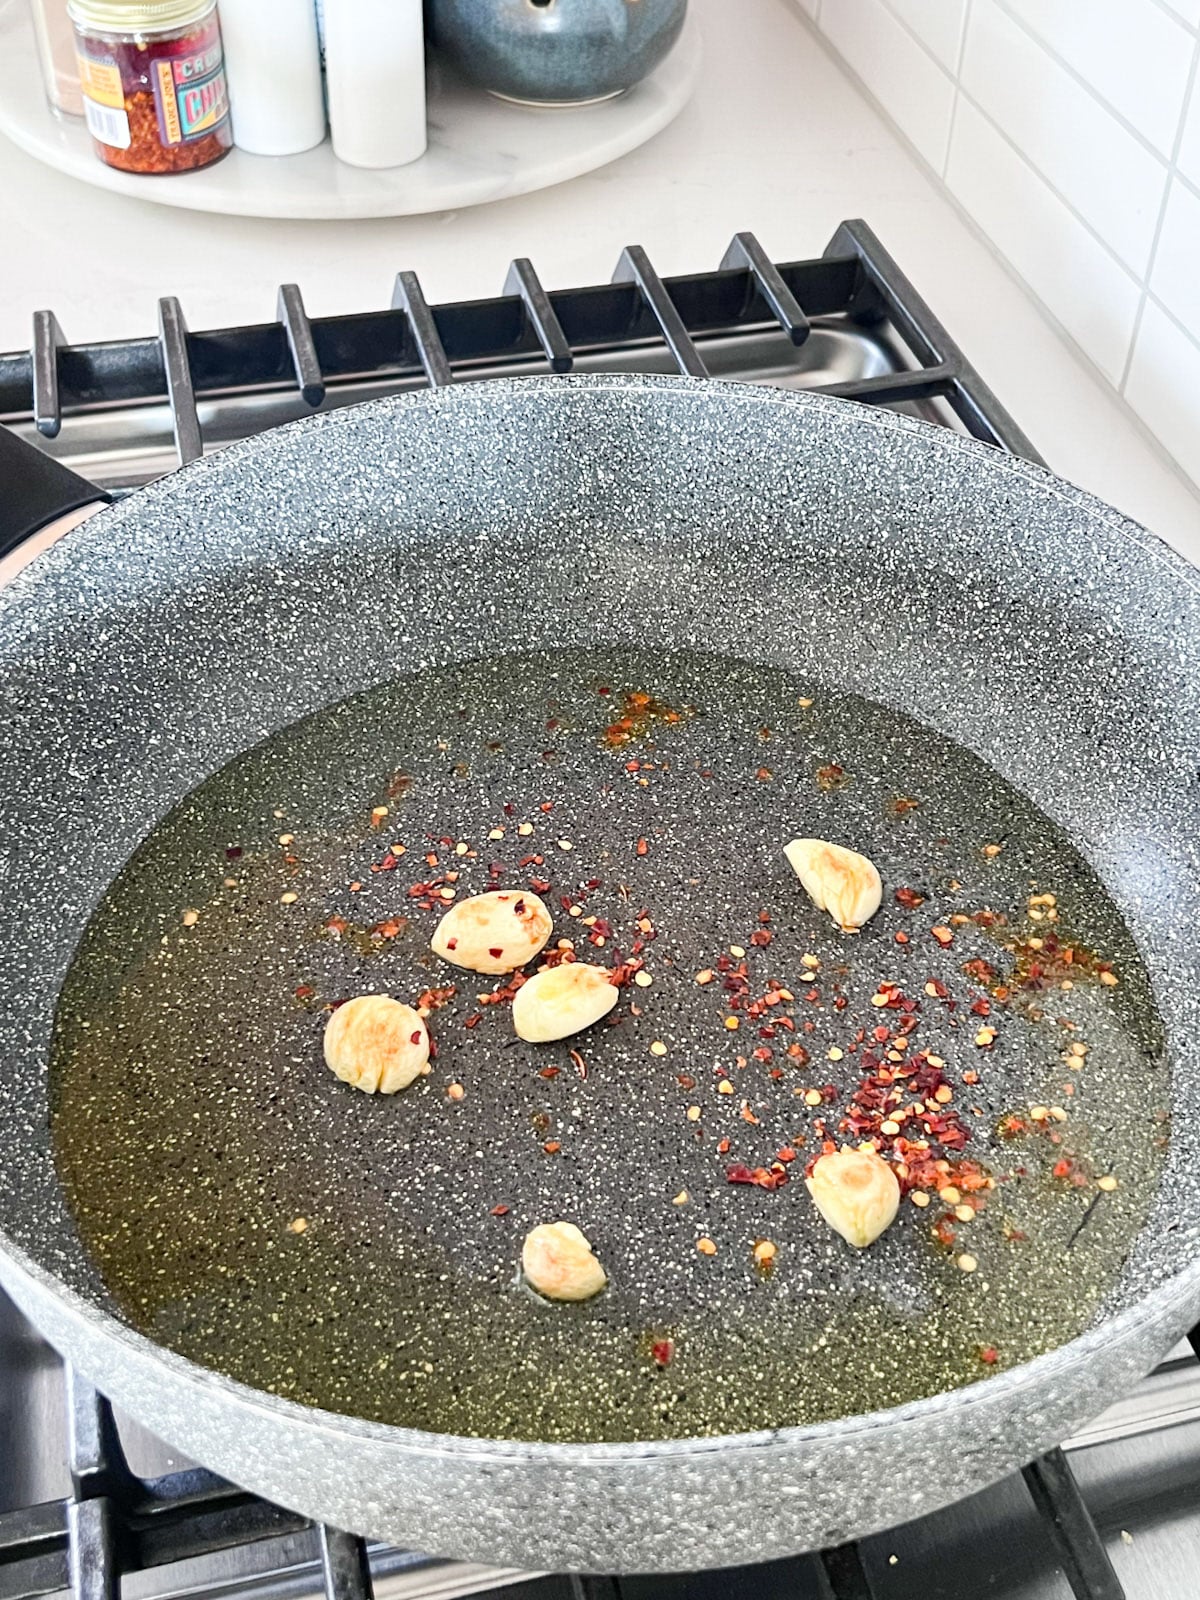 A skillet on a stove with oil, garlic and chili flakes cooking in it.